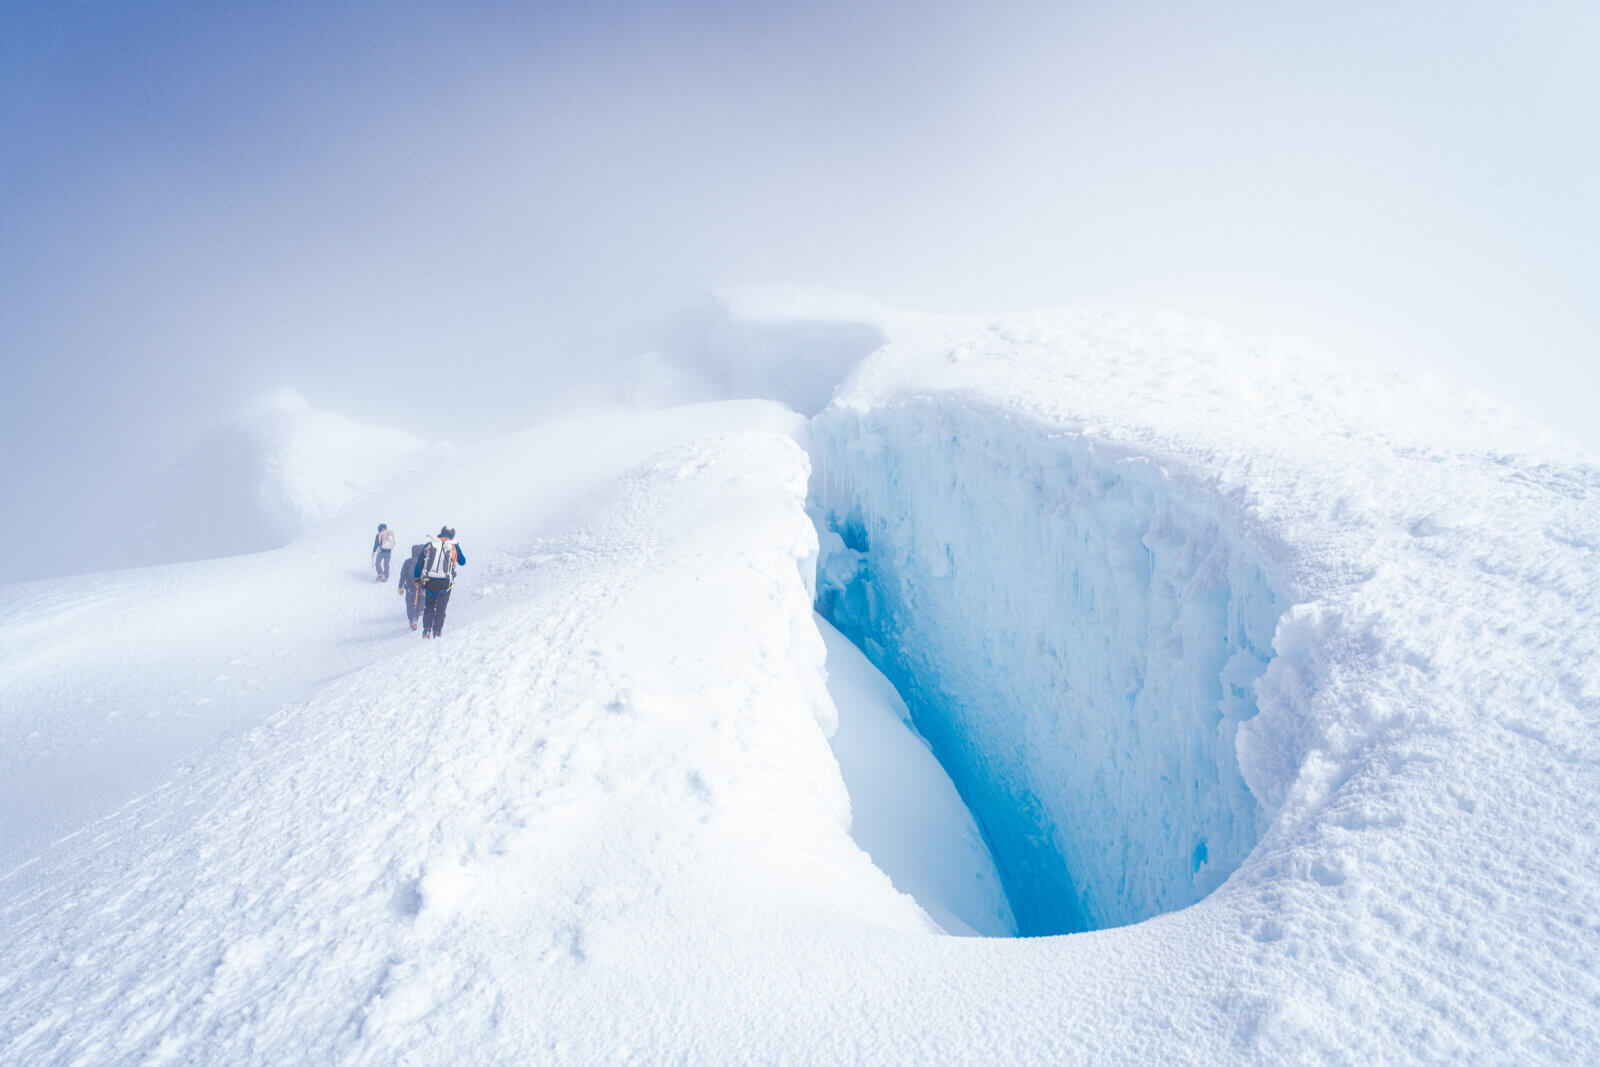 Three skiers descend to the left of a large, round crevasse with a blue crack at the bottom in misty conditions during an international backcountry ski expedition with Alpenglow Expeditions..